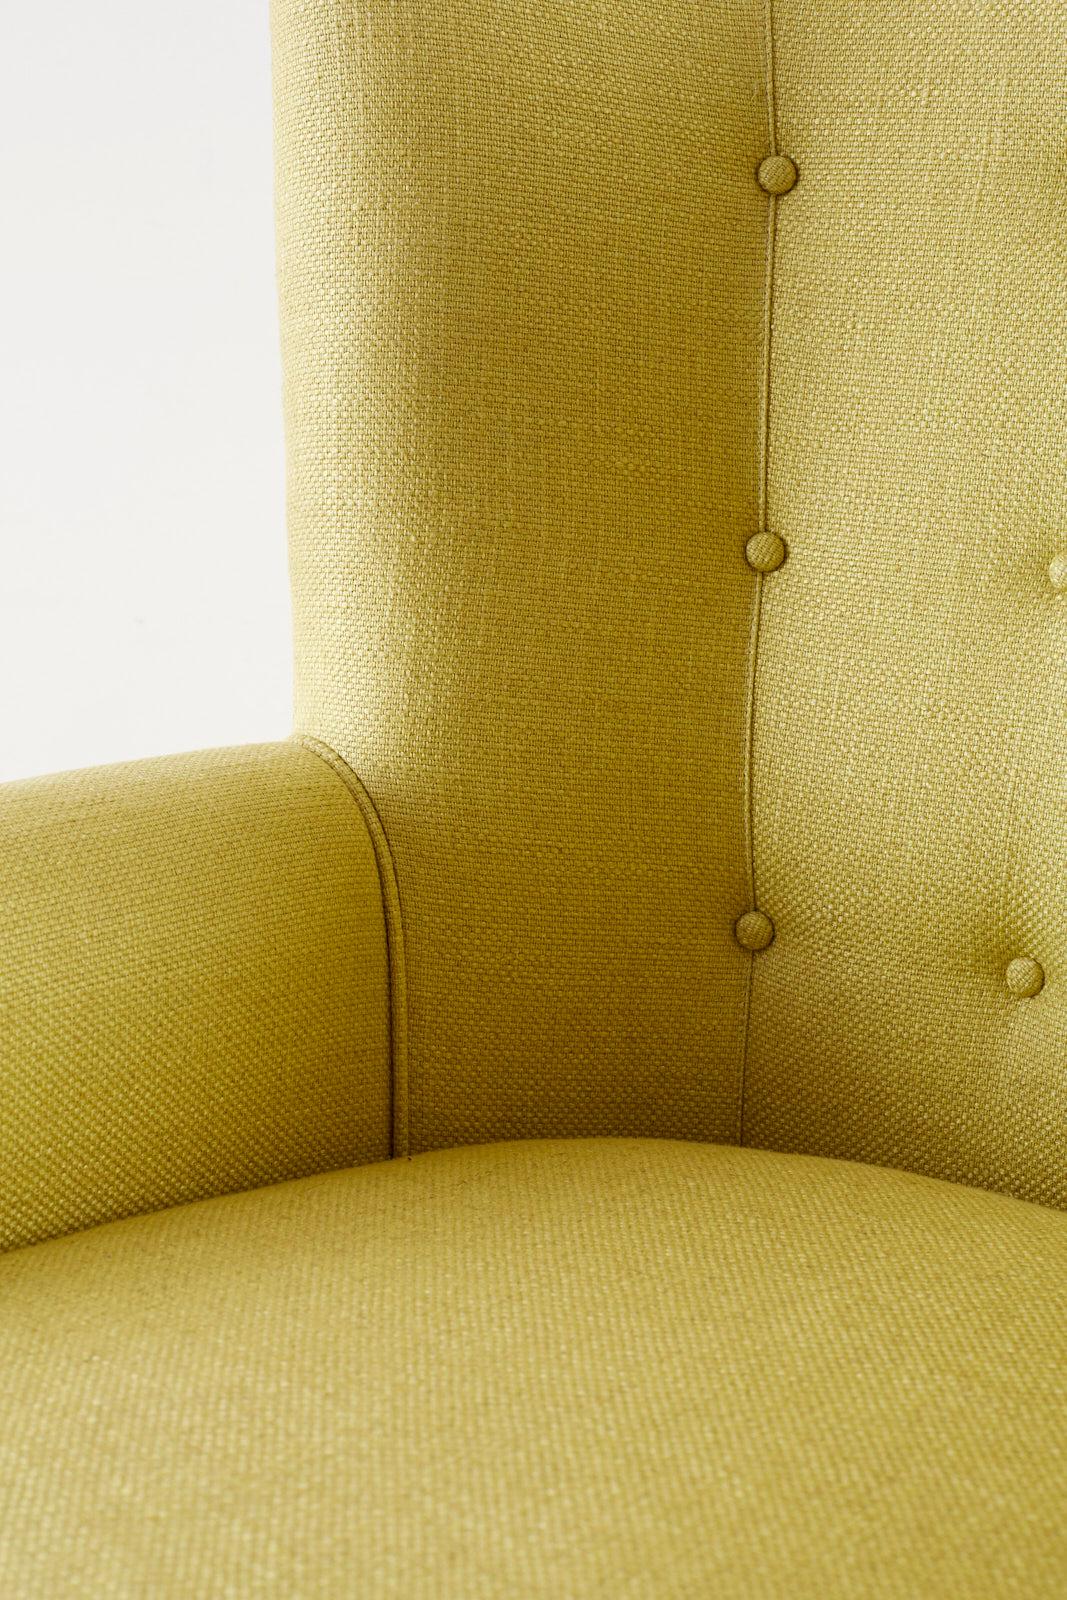 Hardwood Westcott Citron Linen Wing Chair by Bunny Williams